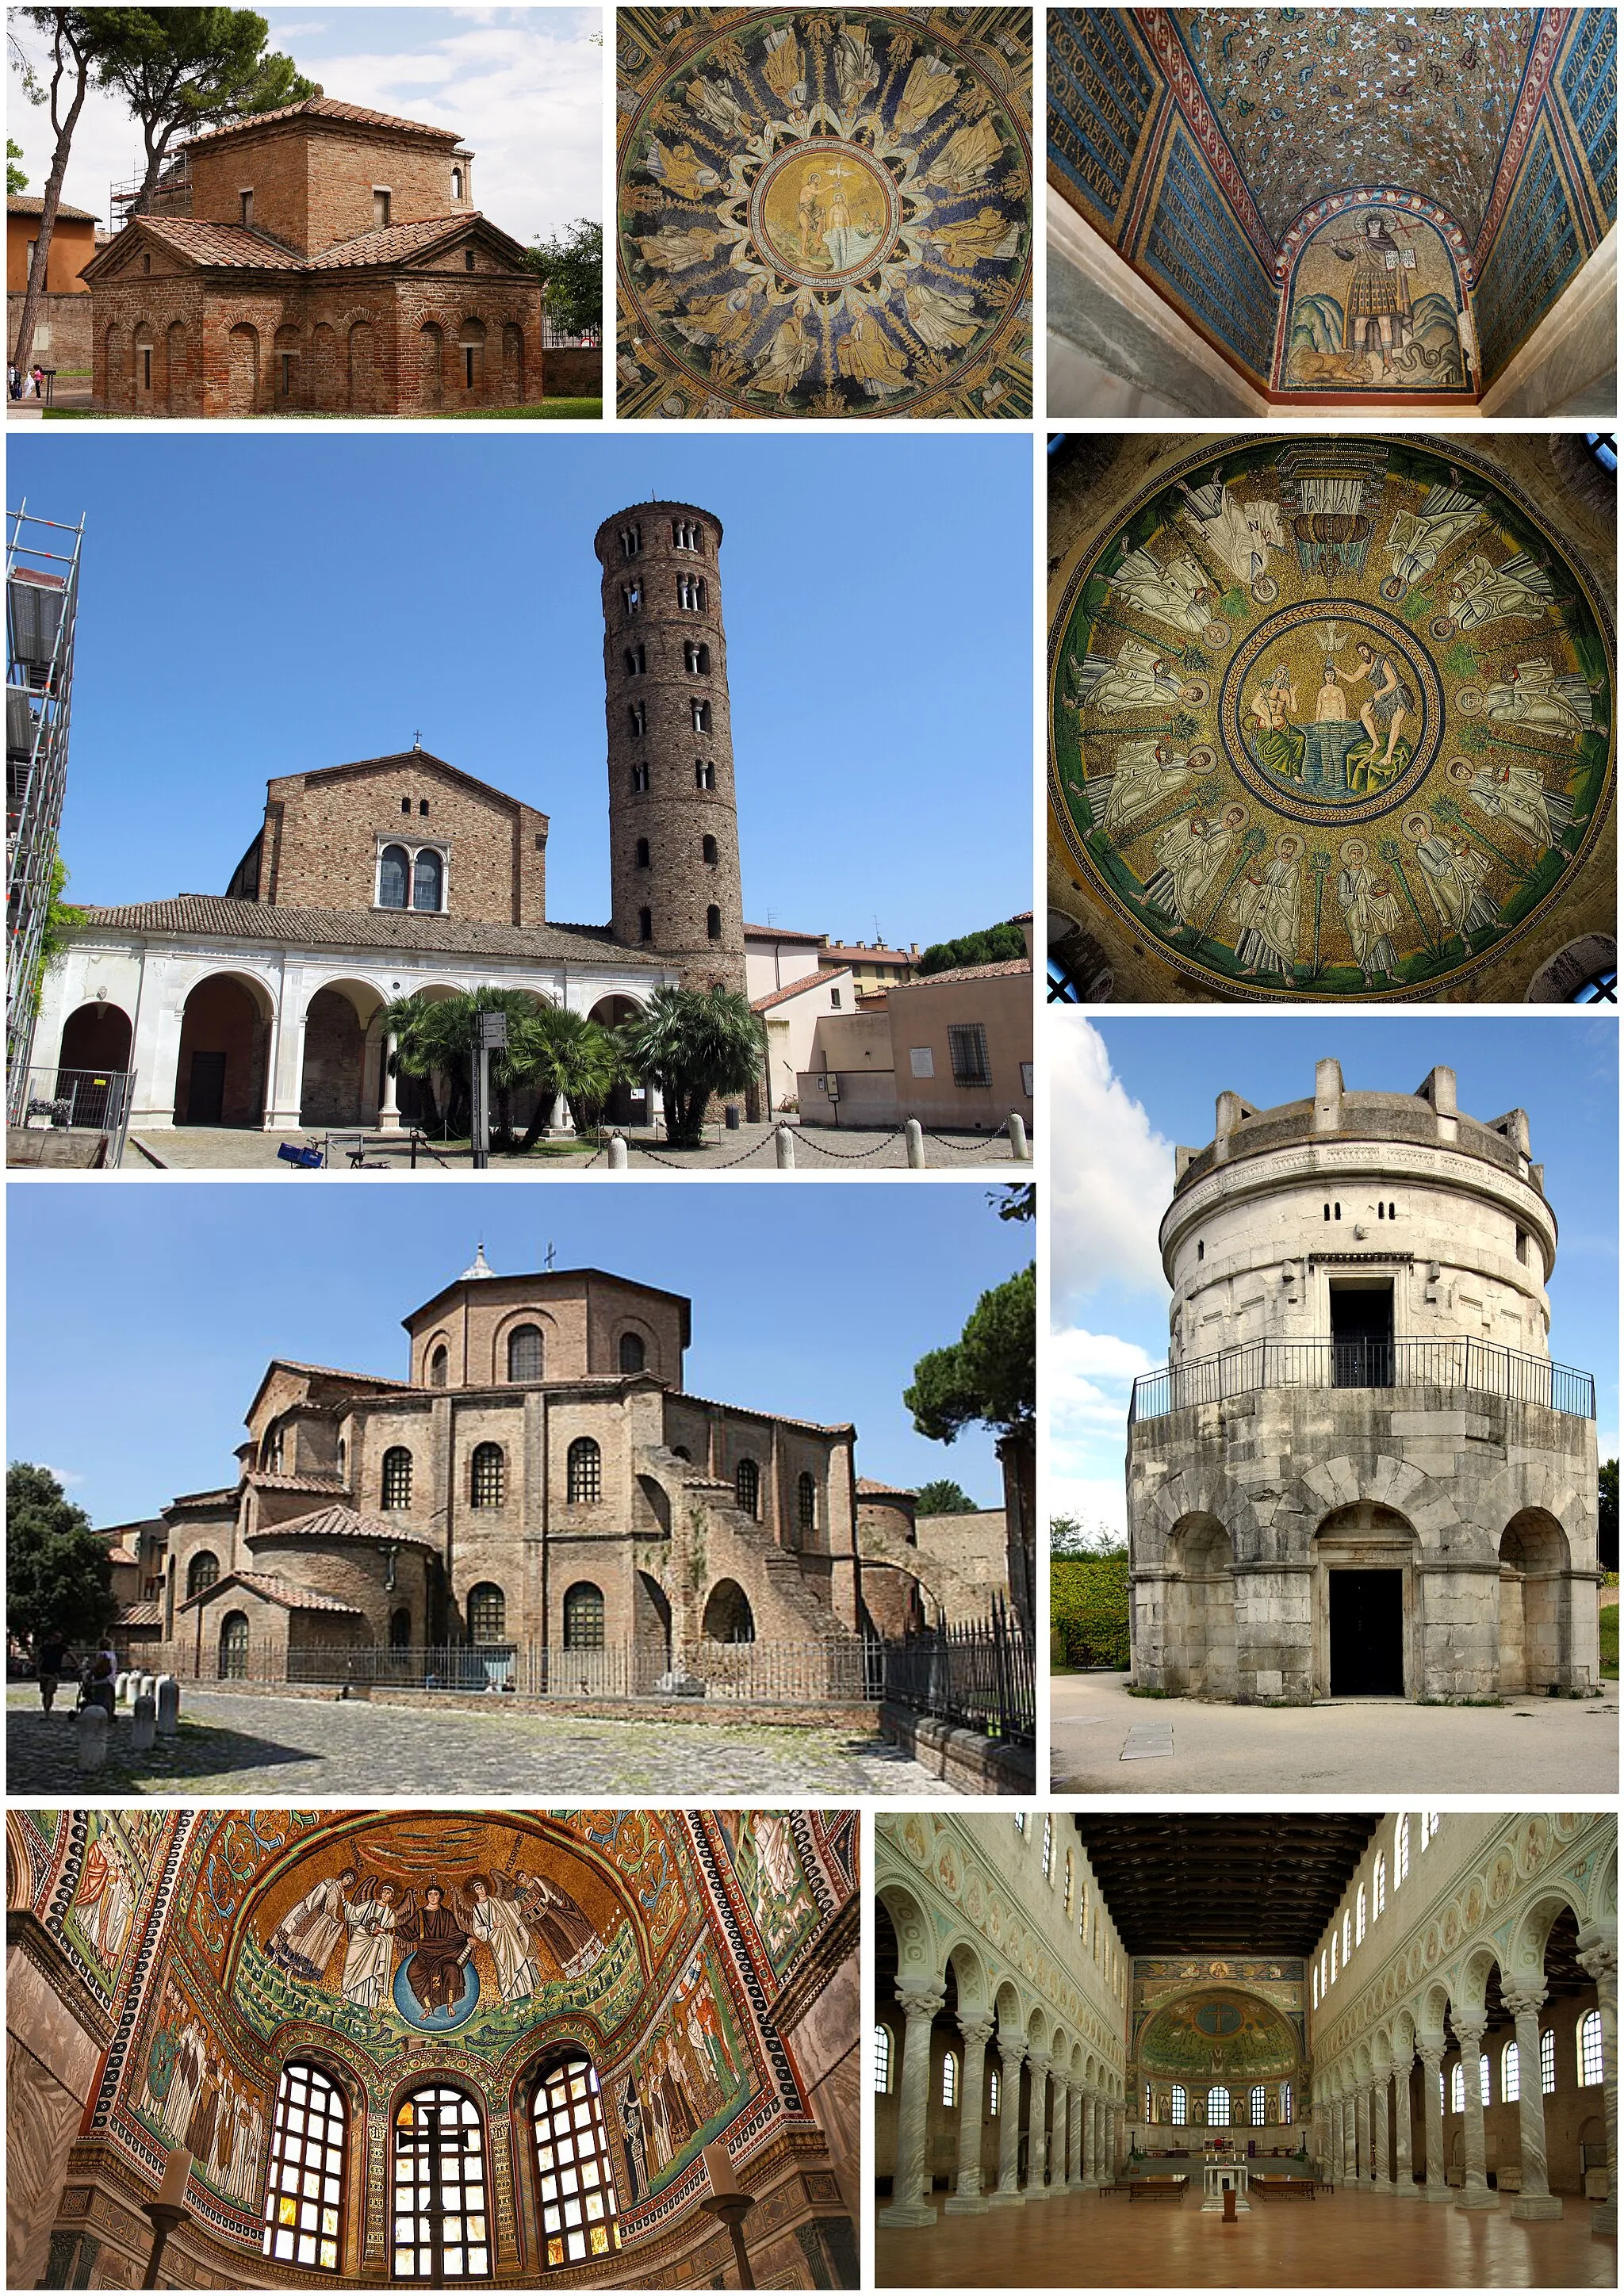 Photo showing: Early Christian monuments and mosaics from the 5th to 6th centuries: 1. Mausoleum of Gally Placidia, 2. Baptistery of the Orthodox, 3. Archbishop's Chapel, 5. Basilica of Sant'Apollinare Nuovo, 6. Baptistery of the Arians, 7. Basilica of San Vitale, 8. Mausoleum of Theodoric, 9. Apse mosaic in the Basilica of San Vitale, 10 Basilica of San Apollinare in Classe.